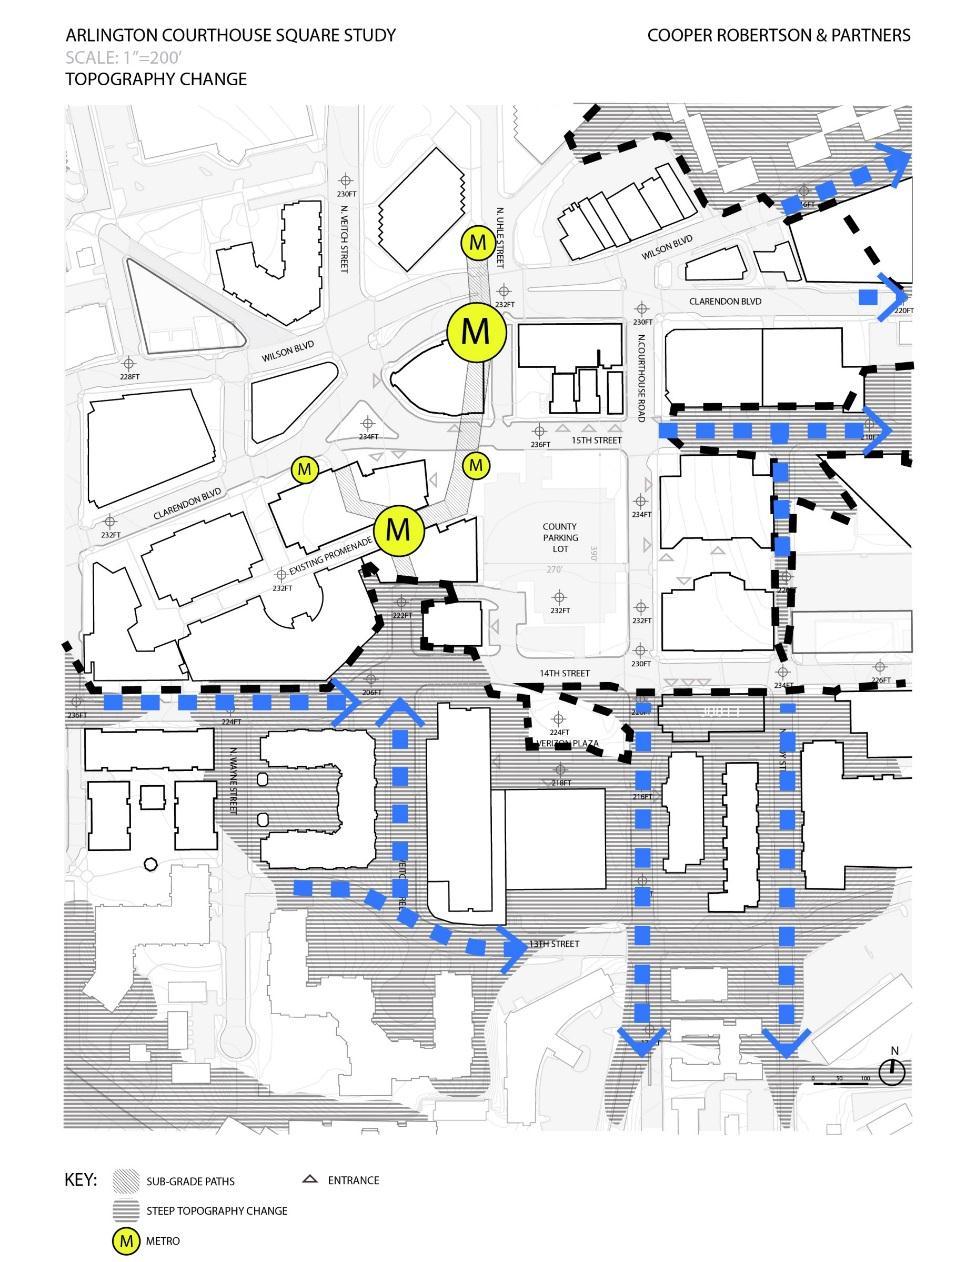 SITE CONSIDERATIONS: TOPOGRAPHY CHALLENGES 1.Site elevations drop off dramatically to the south and east of the courthouse square site.